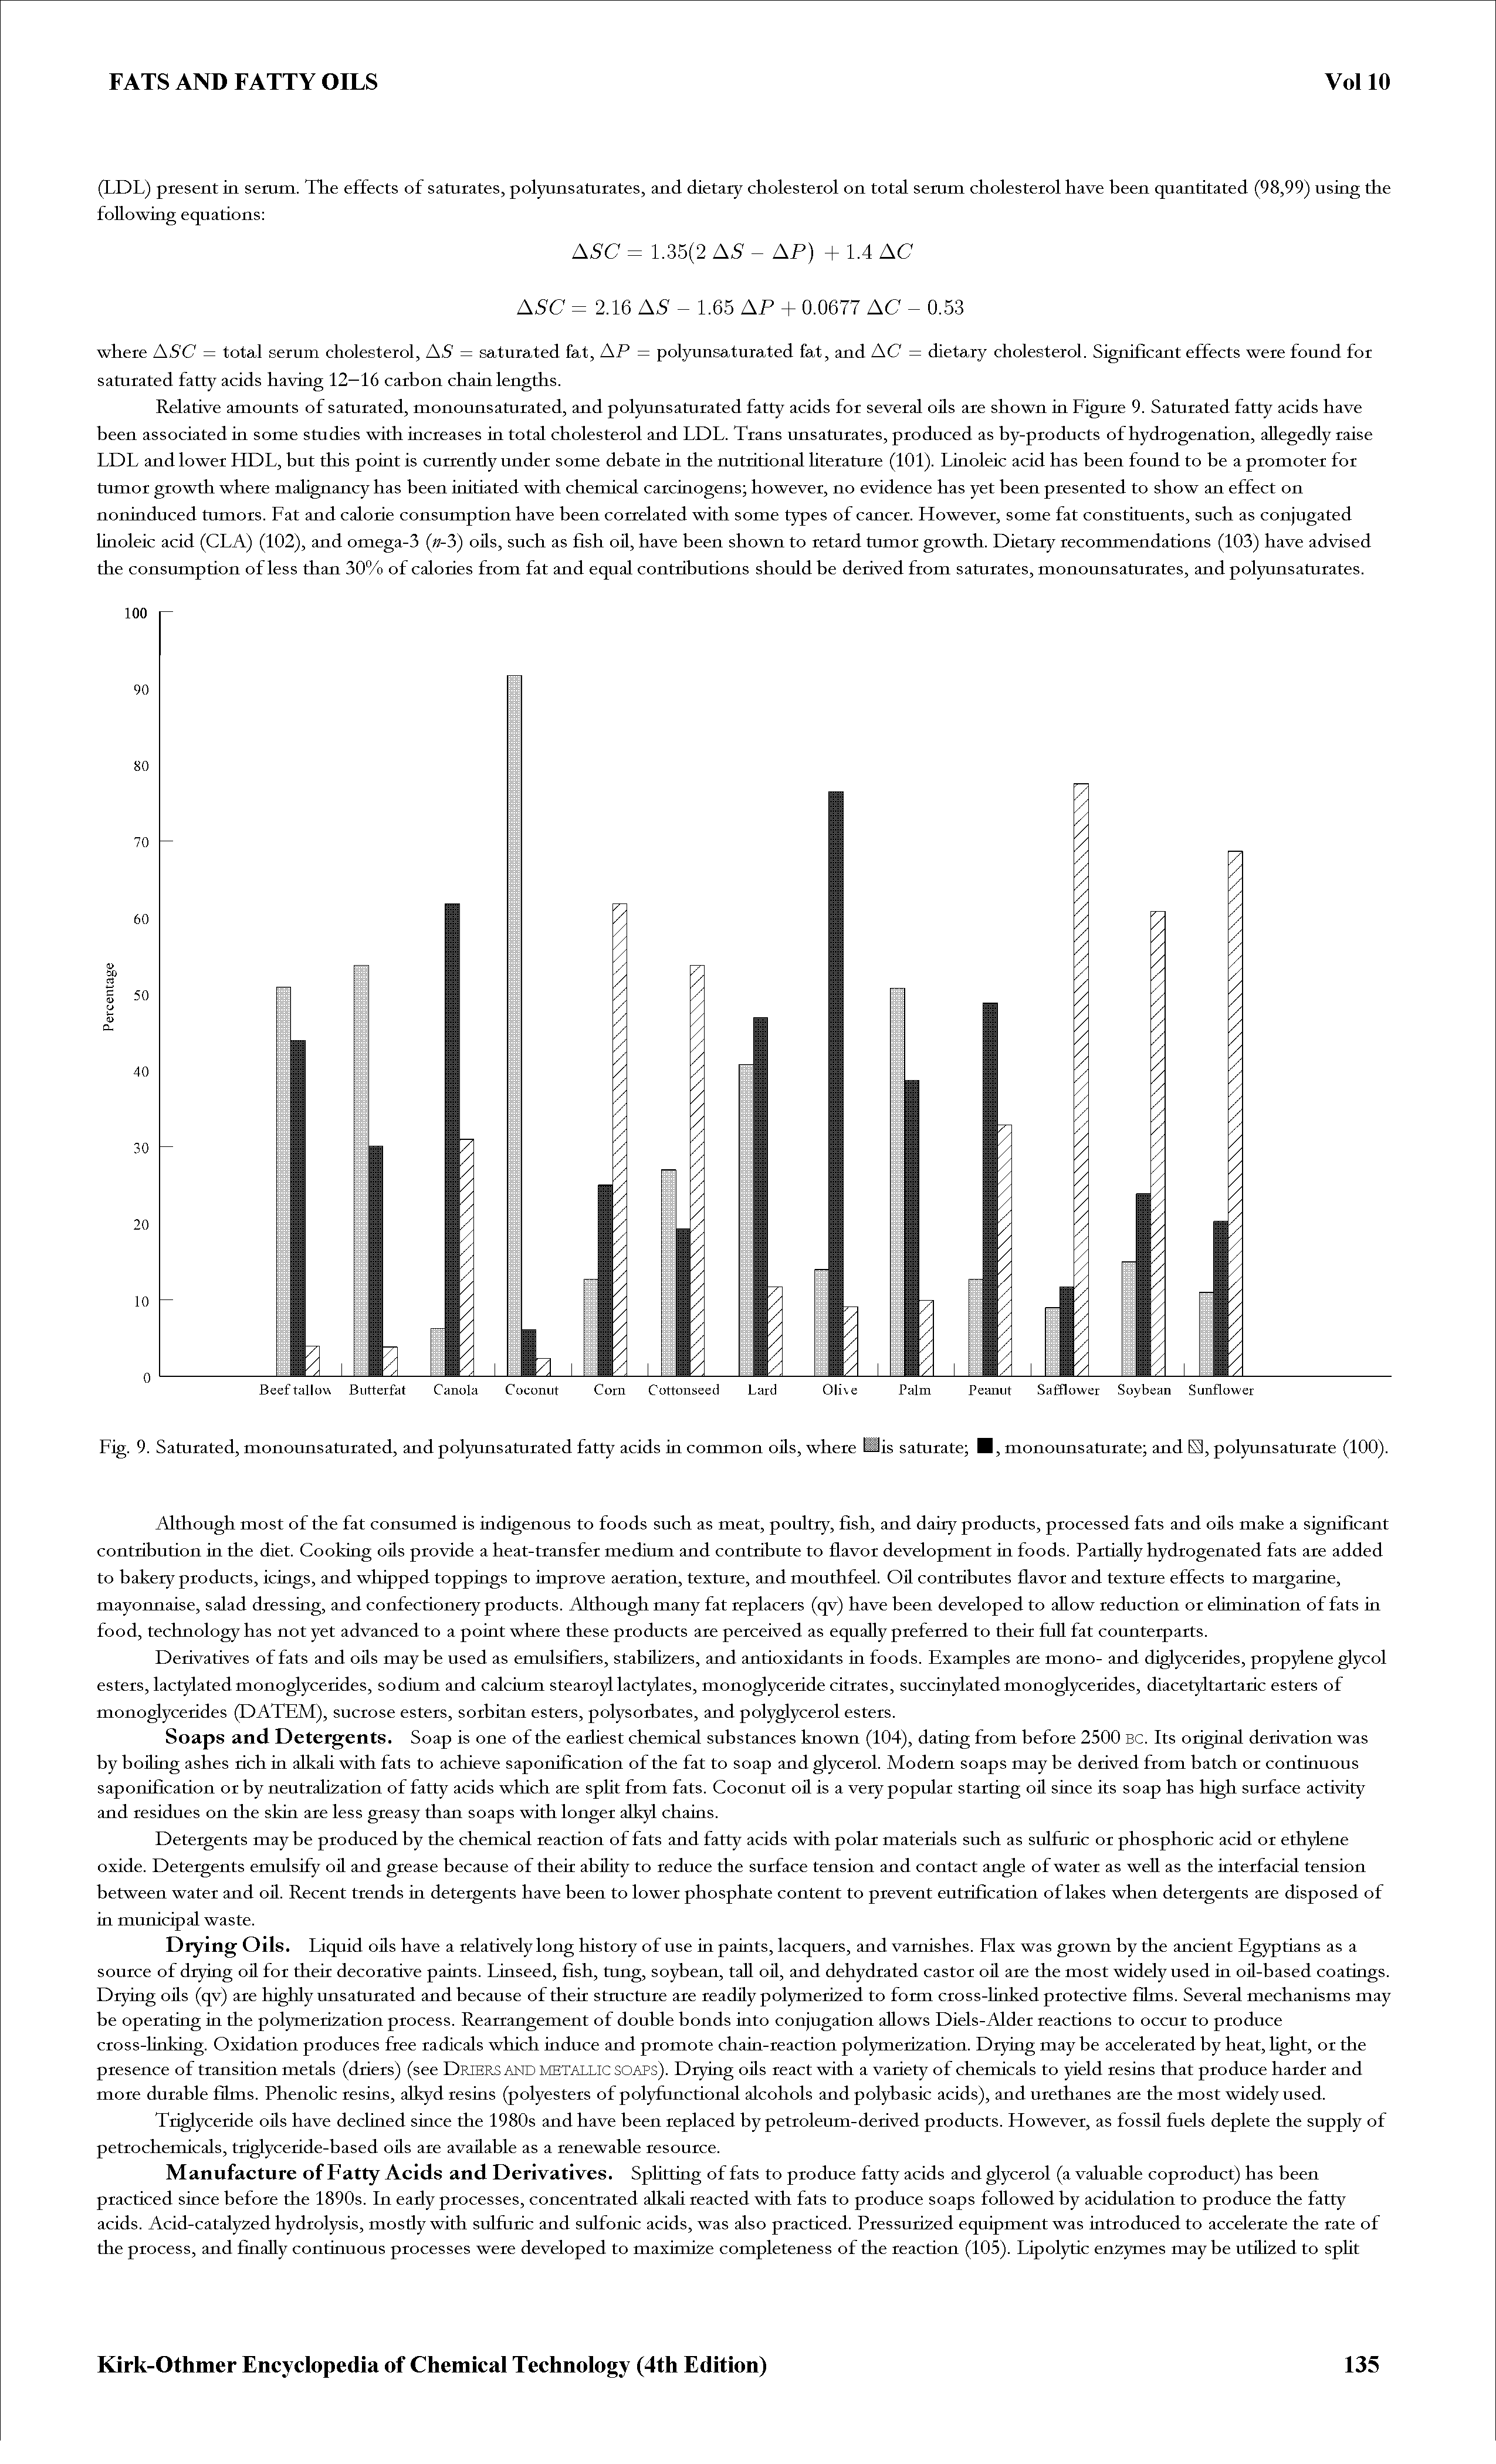 Fig. 9. Saturated, monounsaturated, and polyunsaturated fatty acids in common oils, where His saturate I, monounsaturate and polyunsaturate (100).